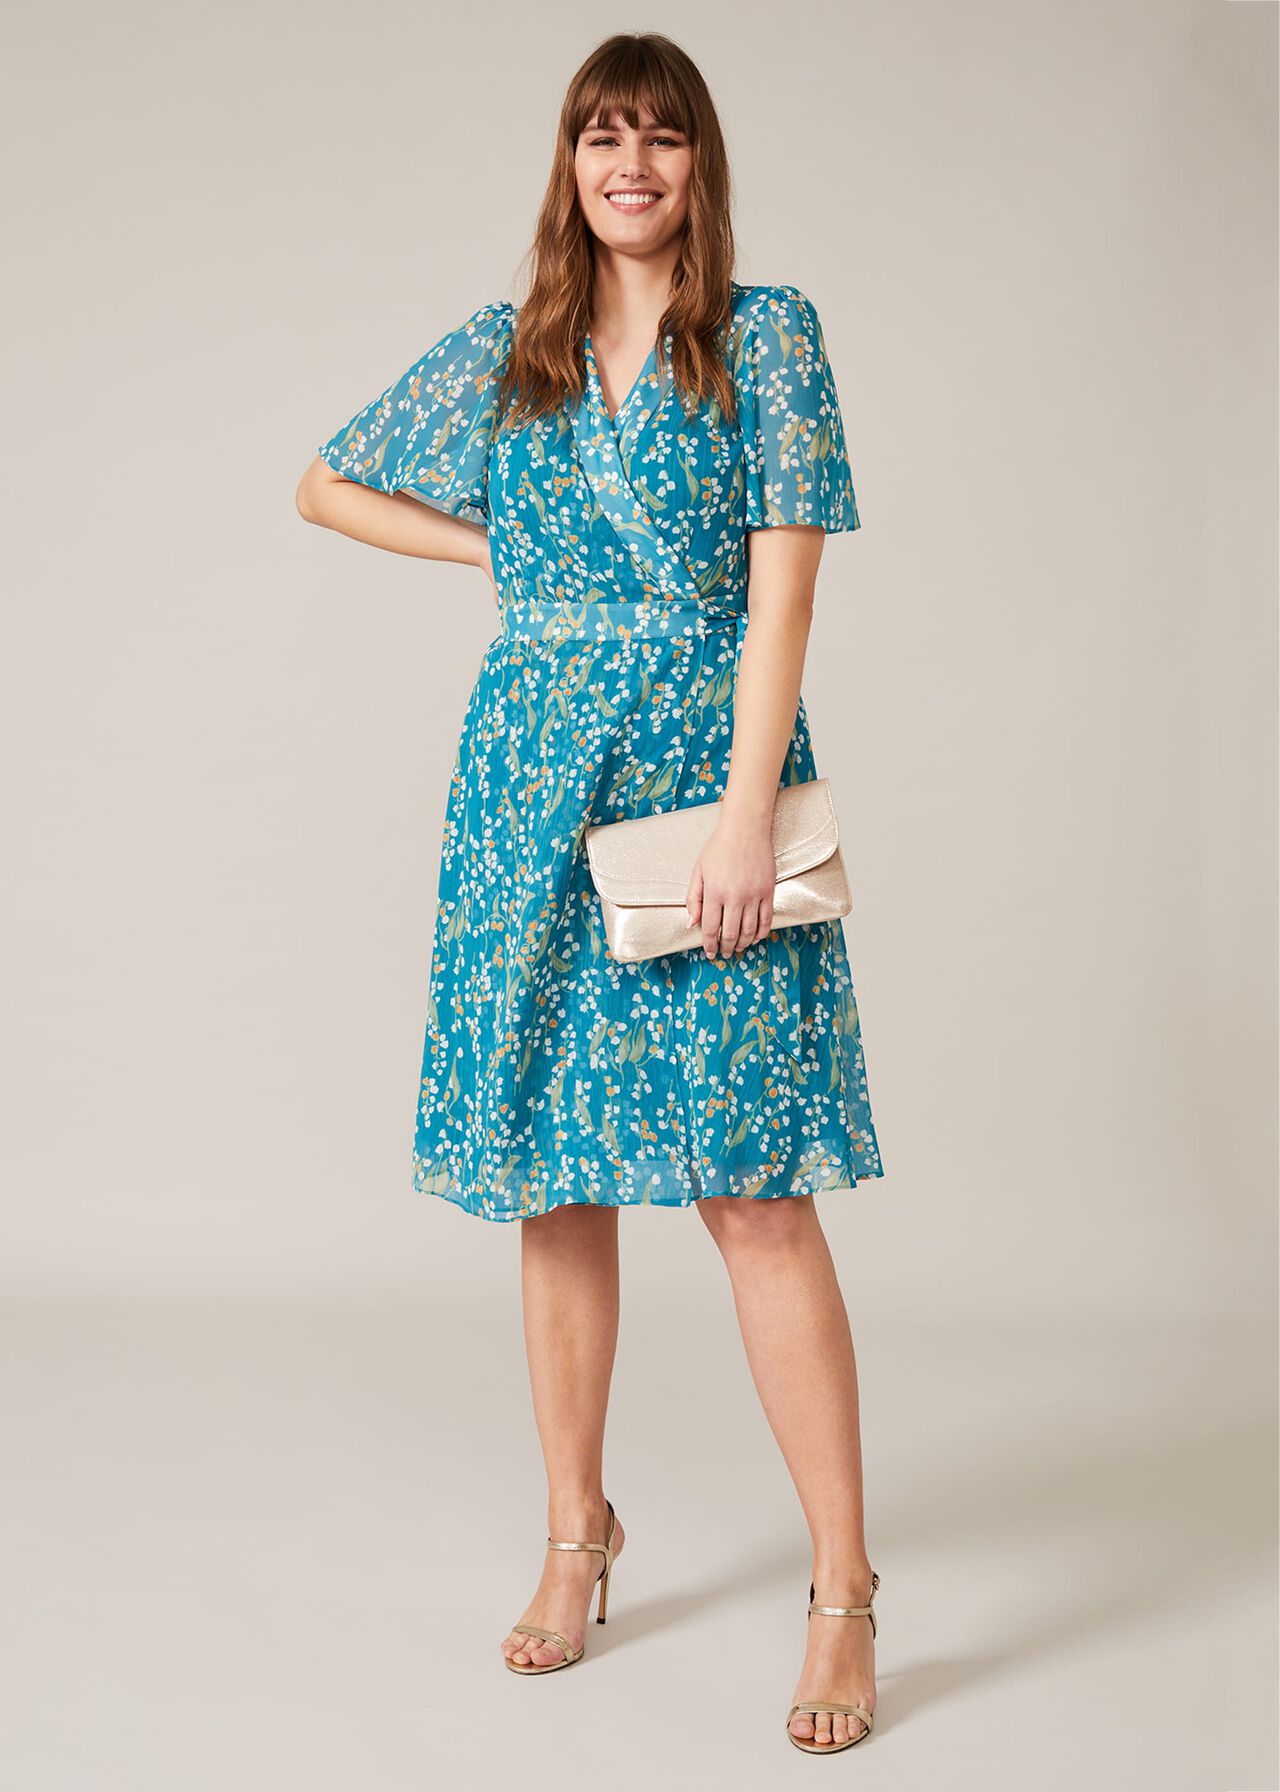 Lily Ditsy Printed Dress Phase Eight 